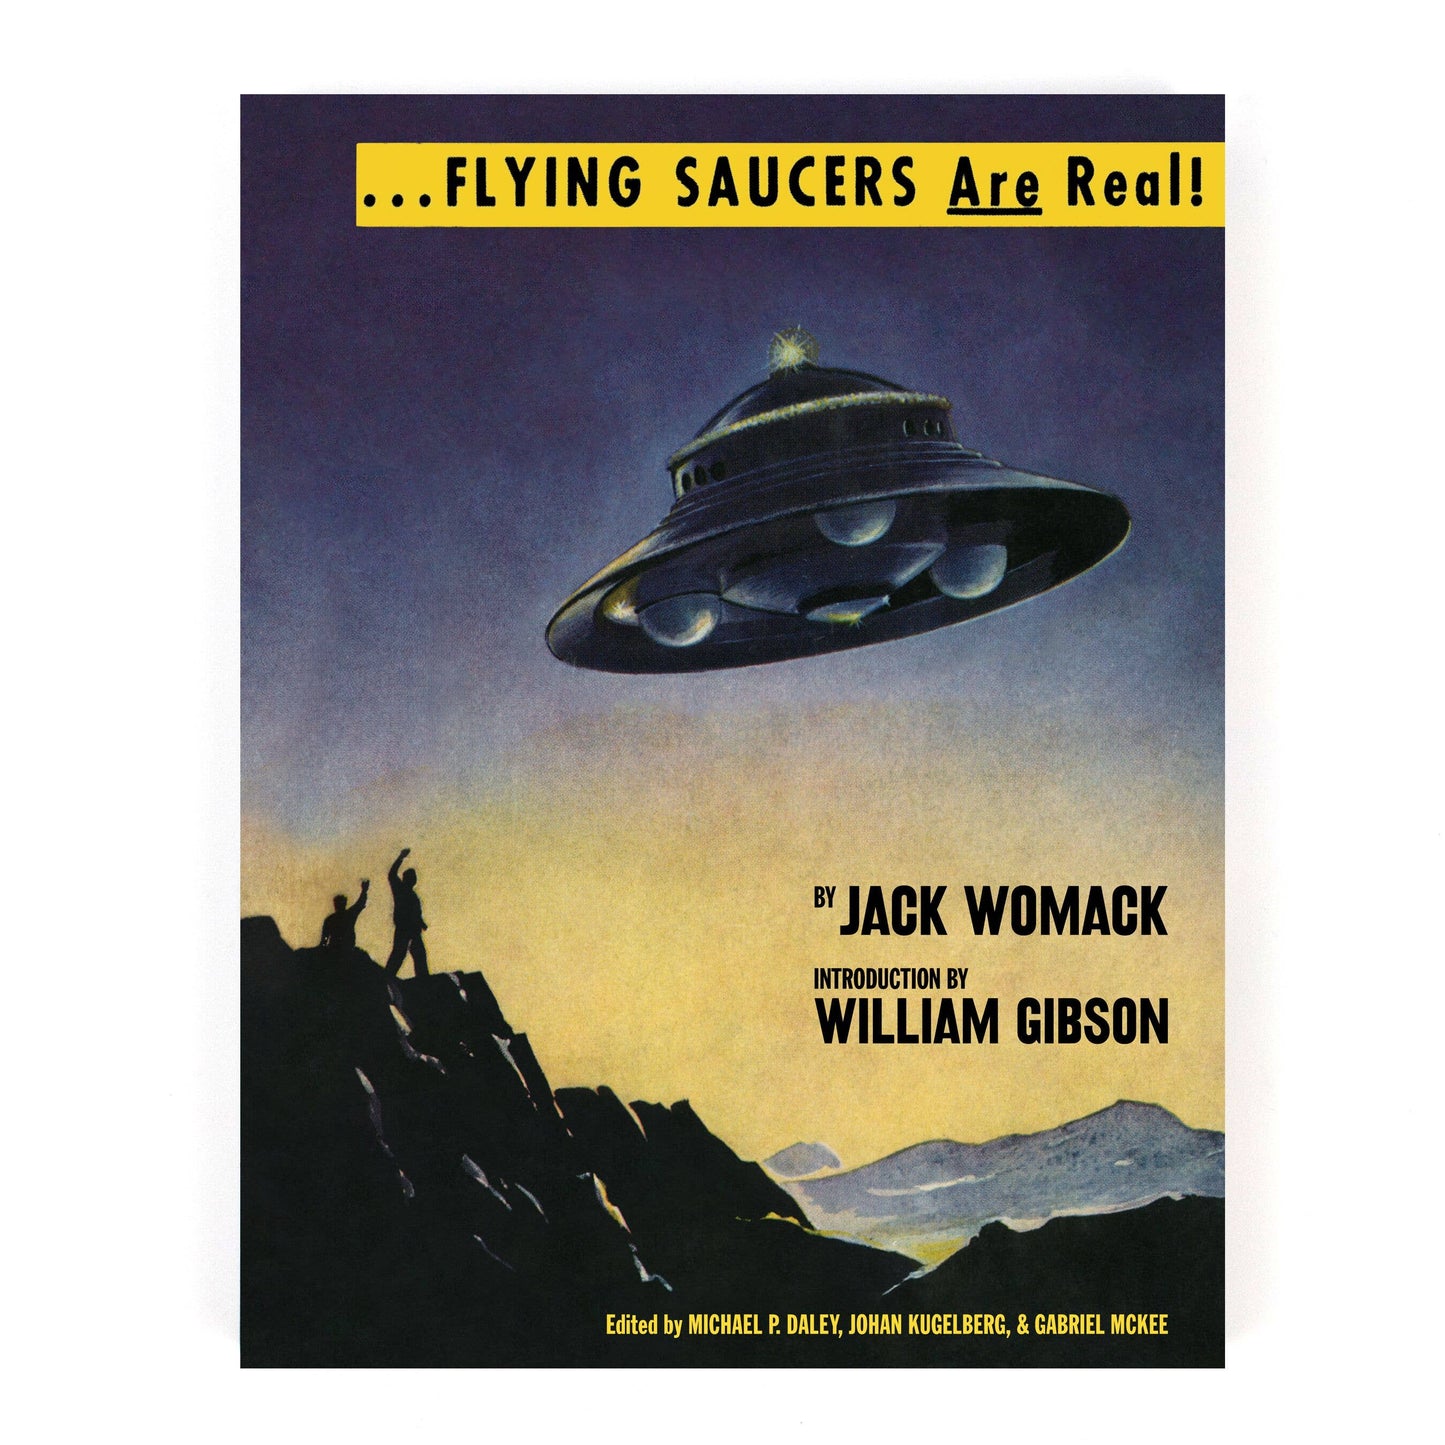 Flying Saucers Are Real by Jack Womack